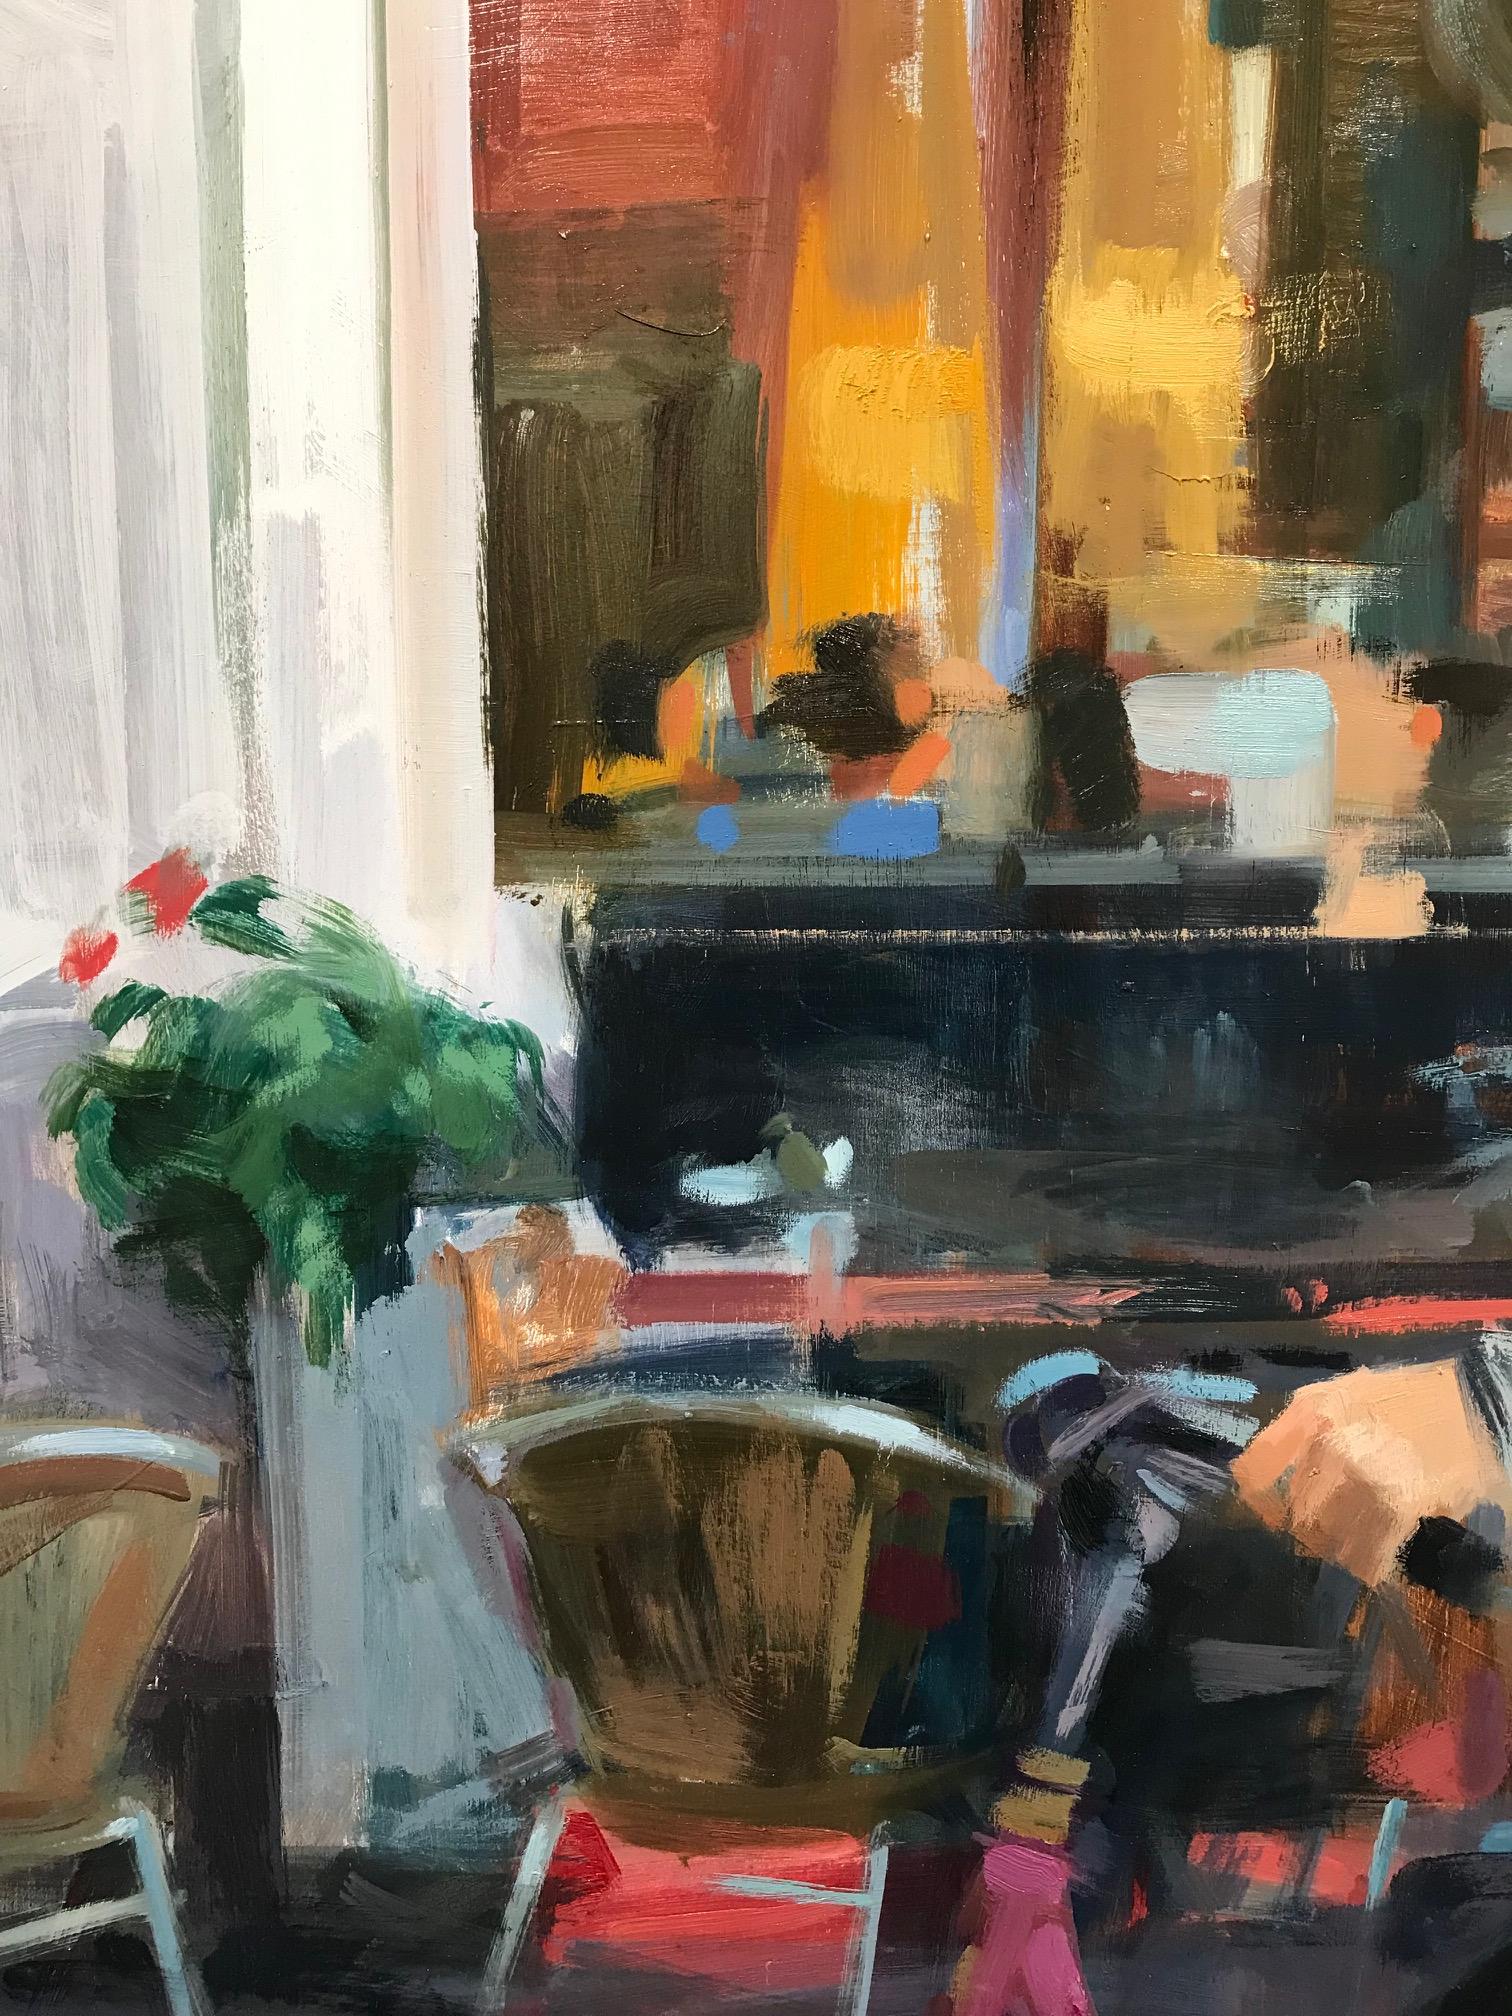 The Spanish artist Mònica Castanys is inspired by everyday scenes. Moments, femininity and light are the basis of her paintings. Her color palette is reminiscent of the Impressionist, but with an expressive touch and her gaze is mainly focused on